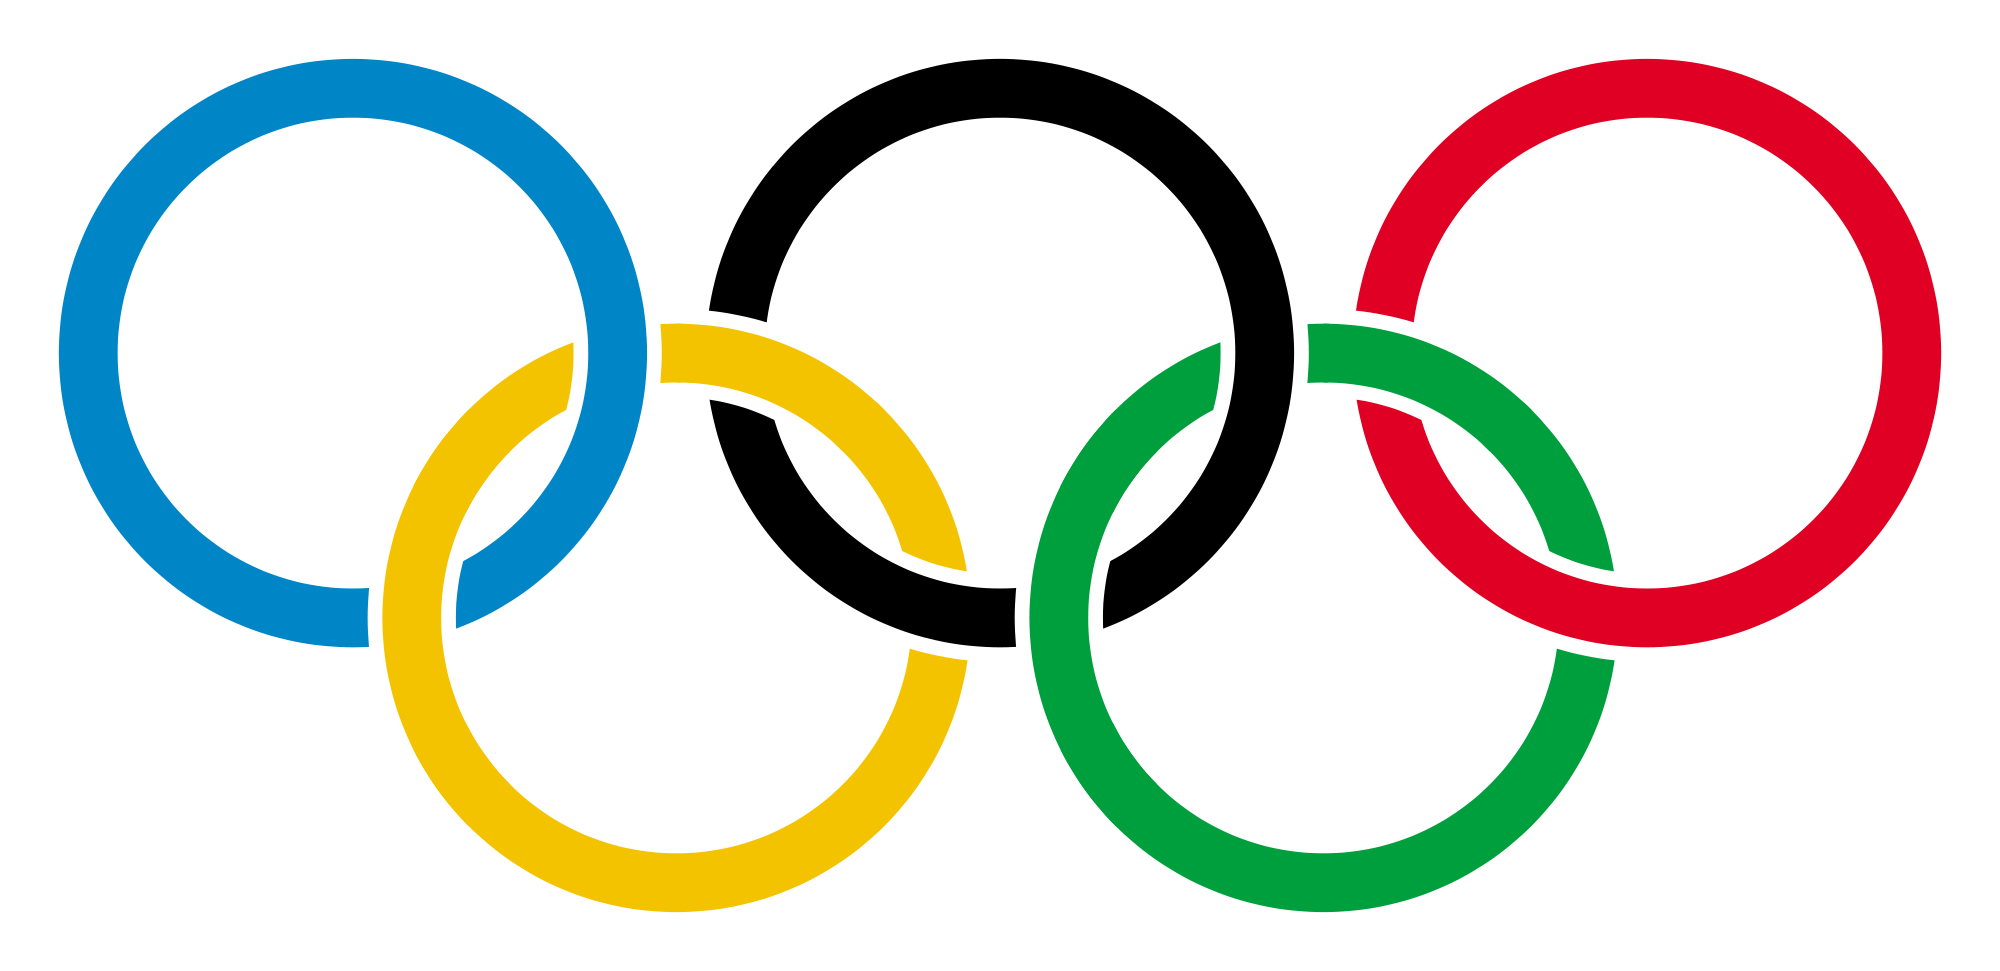 The Olympic rings as drawn by